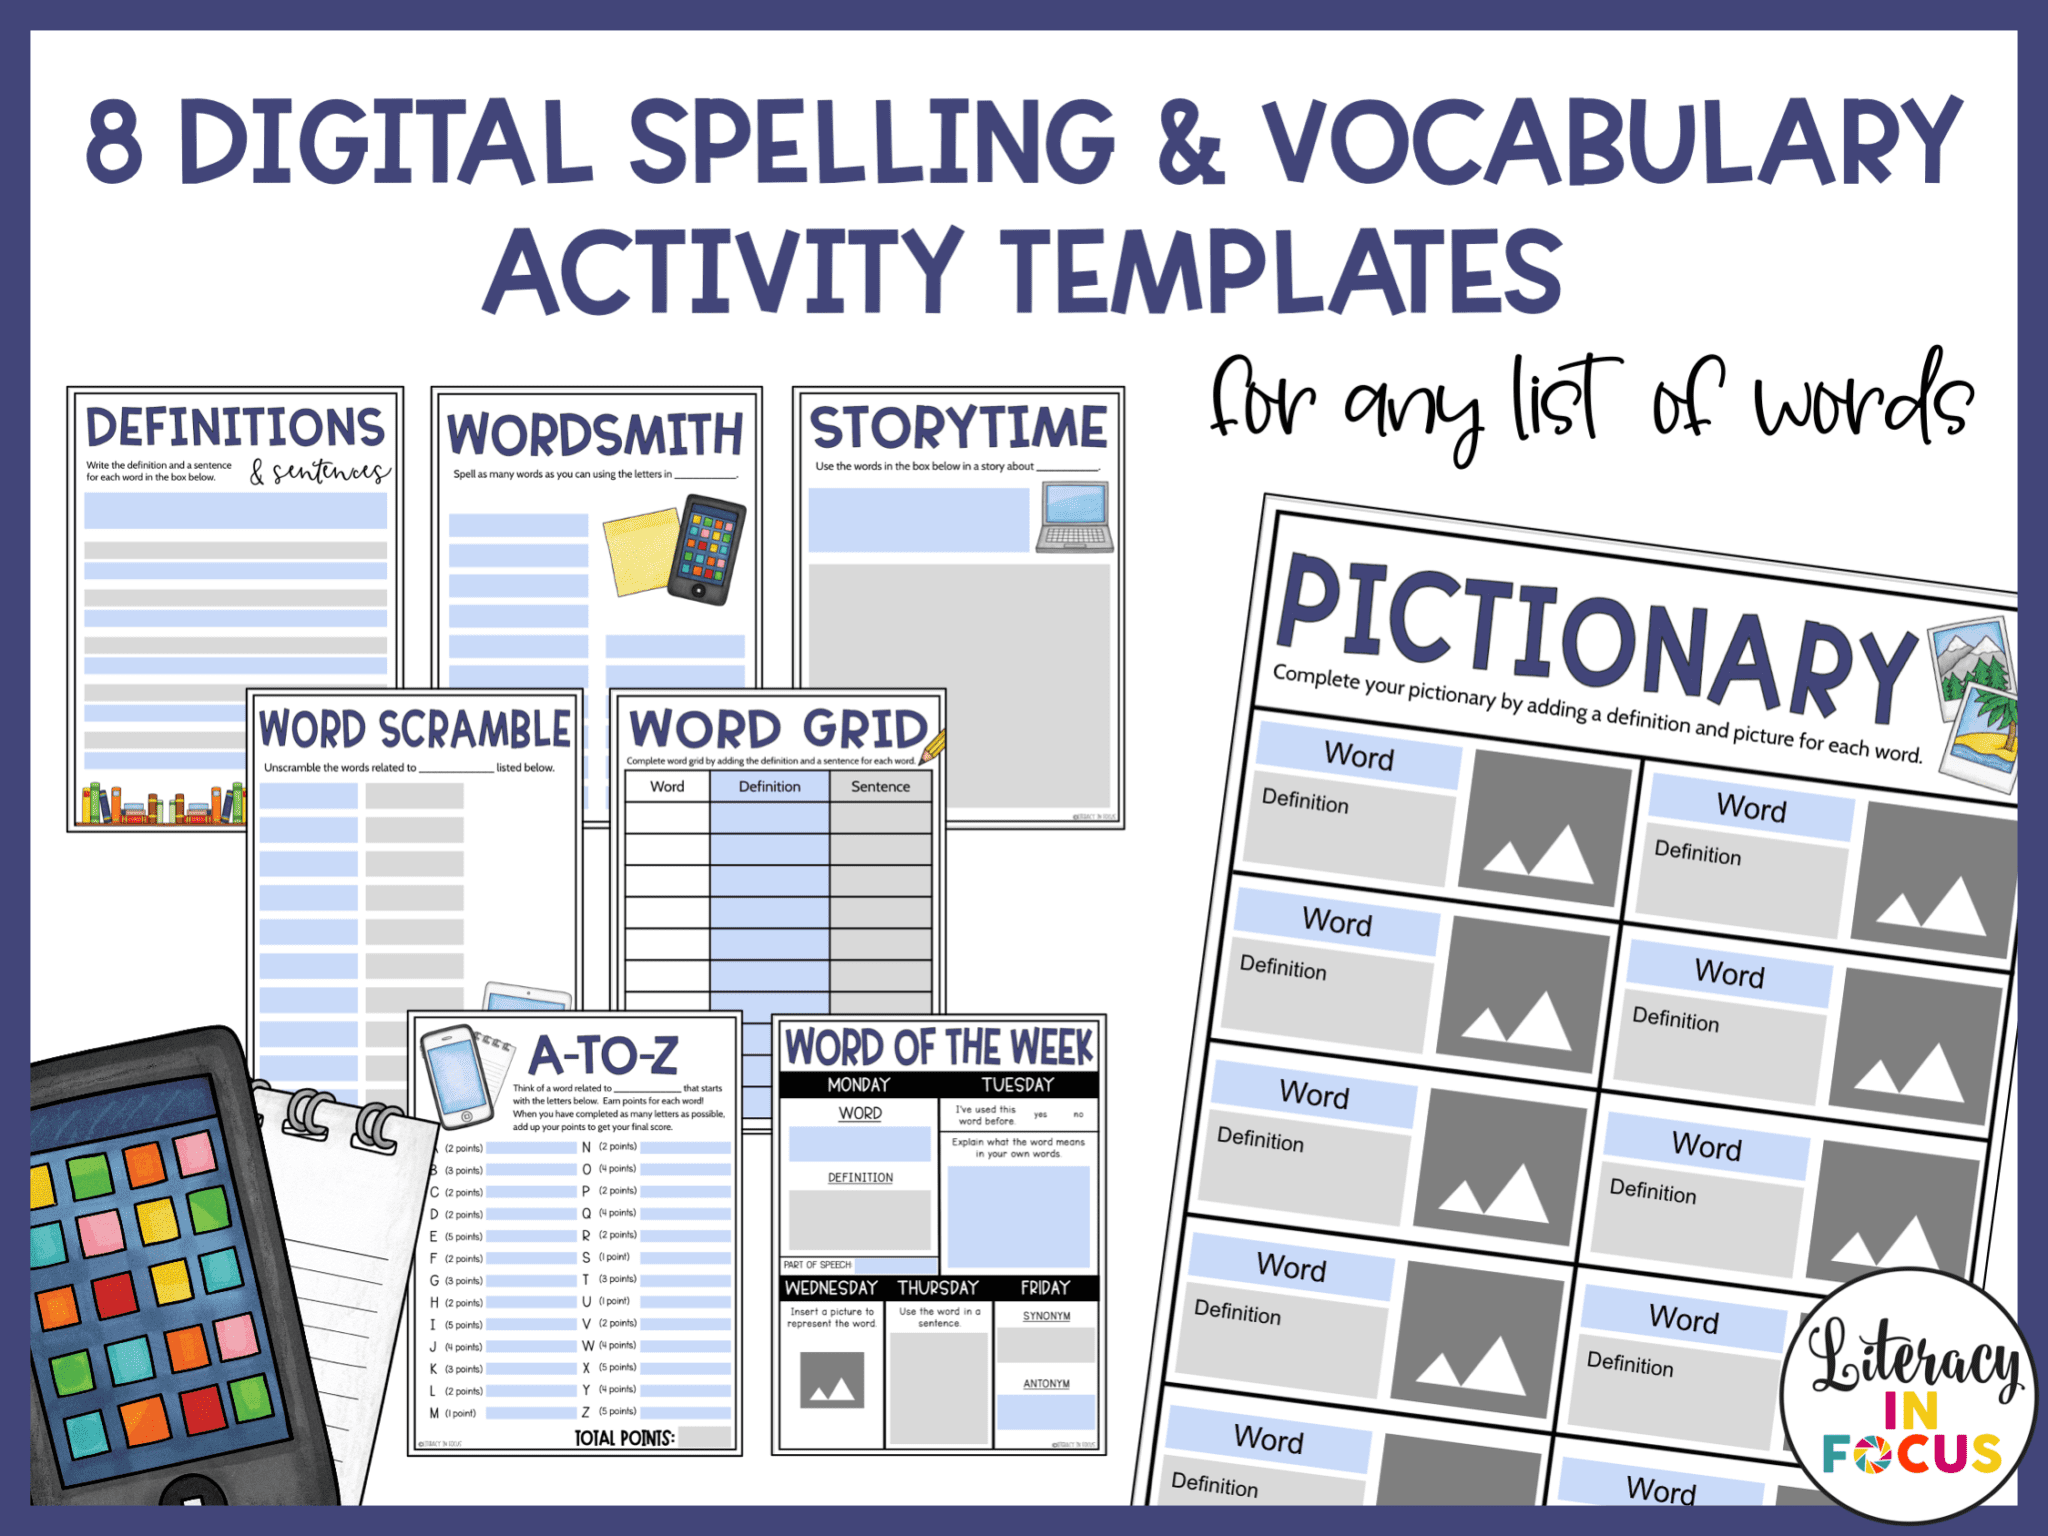 Digital Spelling and Vocabulary Activity Templates